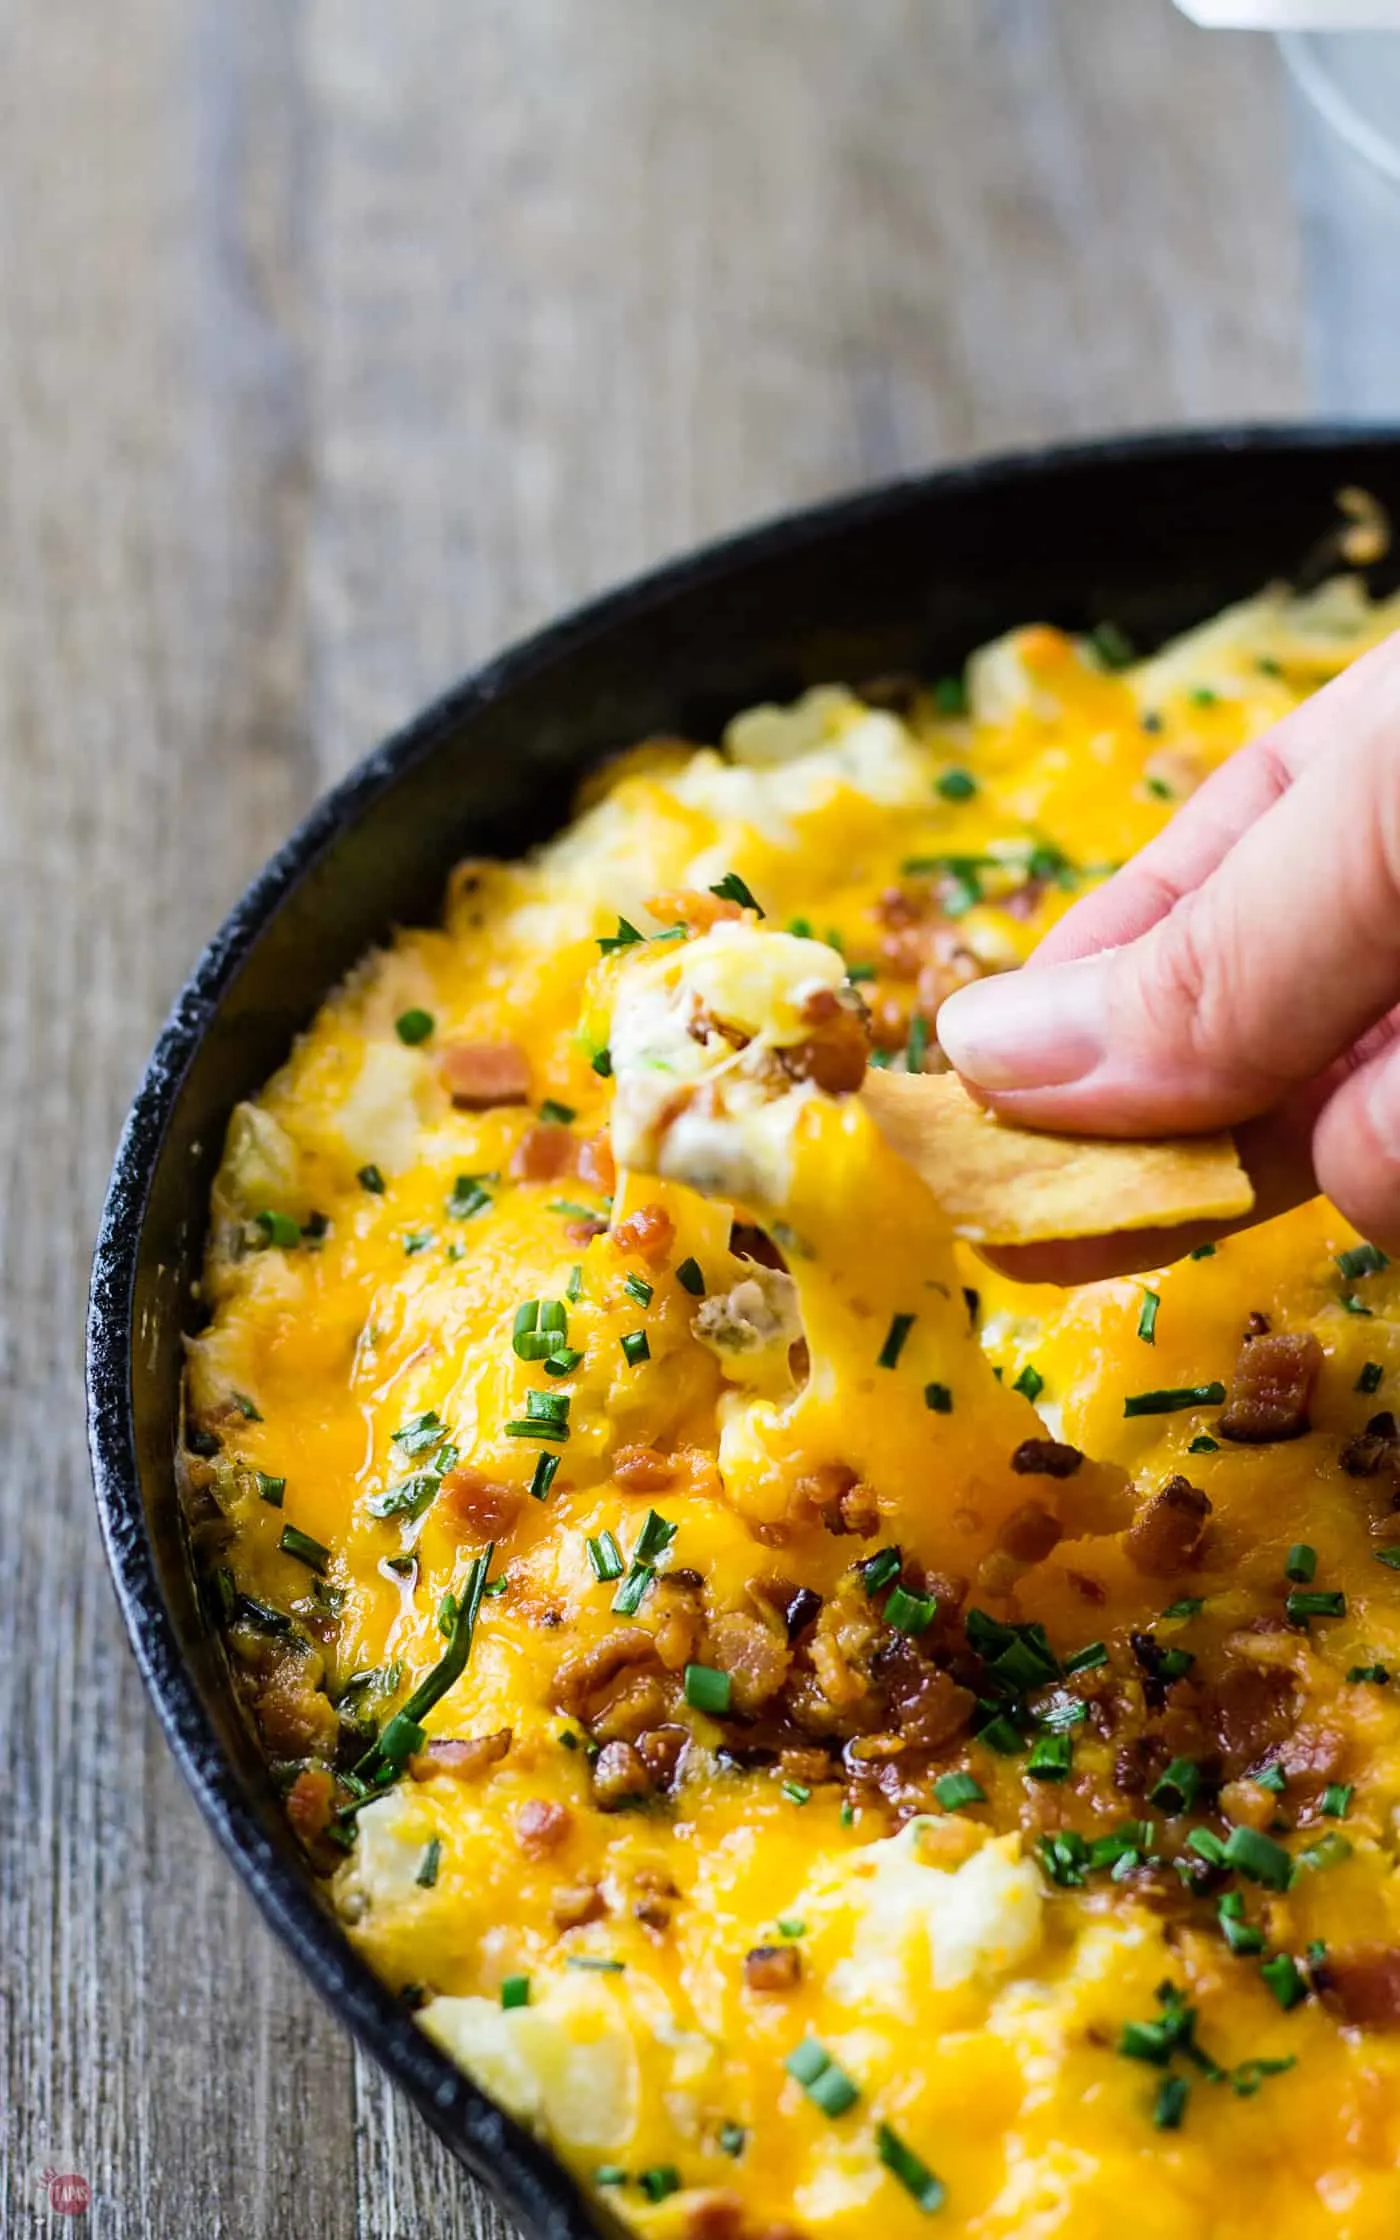 hand dipping chip into cast iron skillet filled with loaded potato skin dip